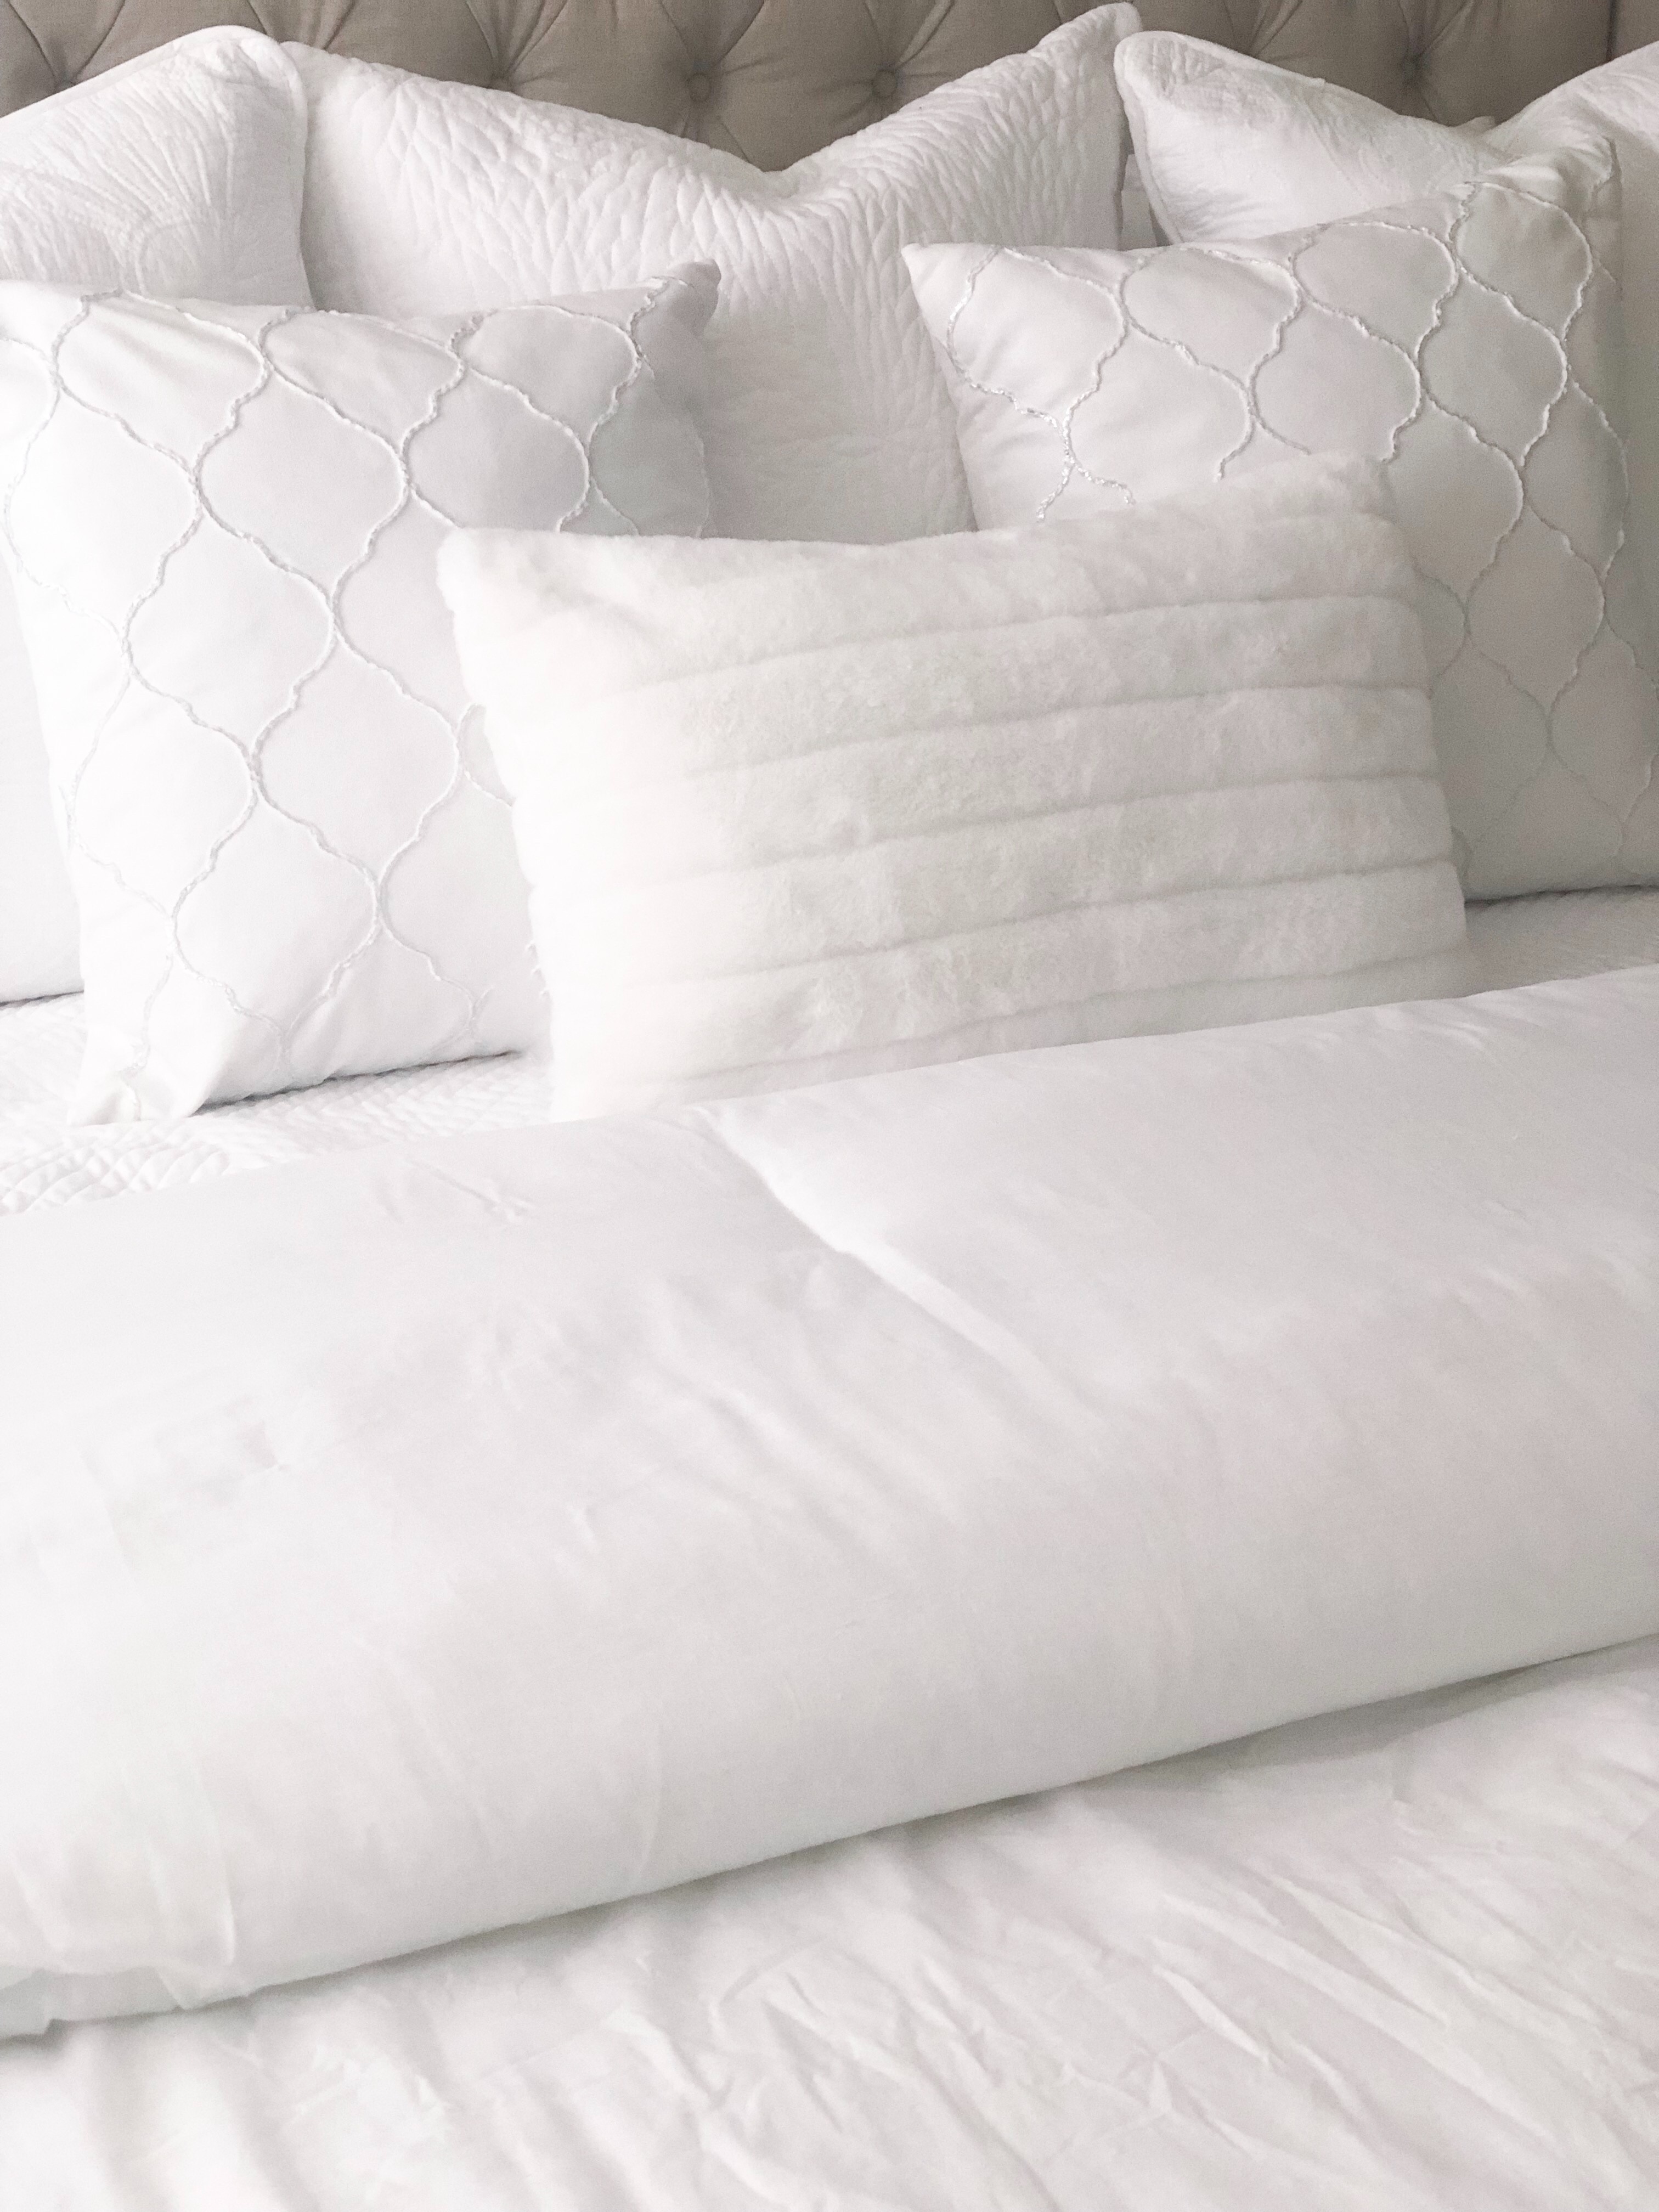 How to style a bed - HomeSense; Livin Life with Style